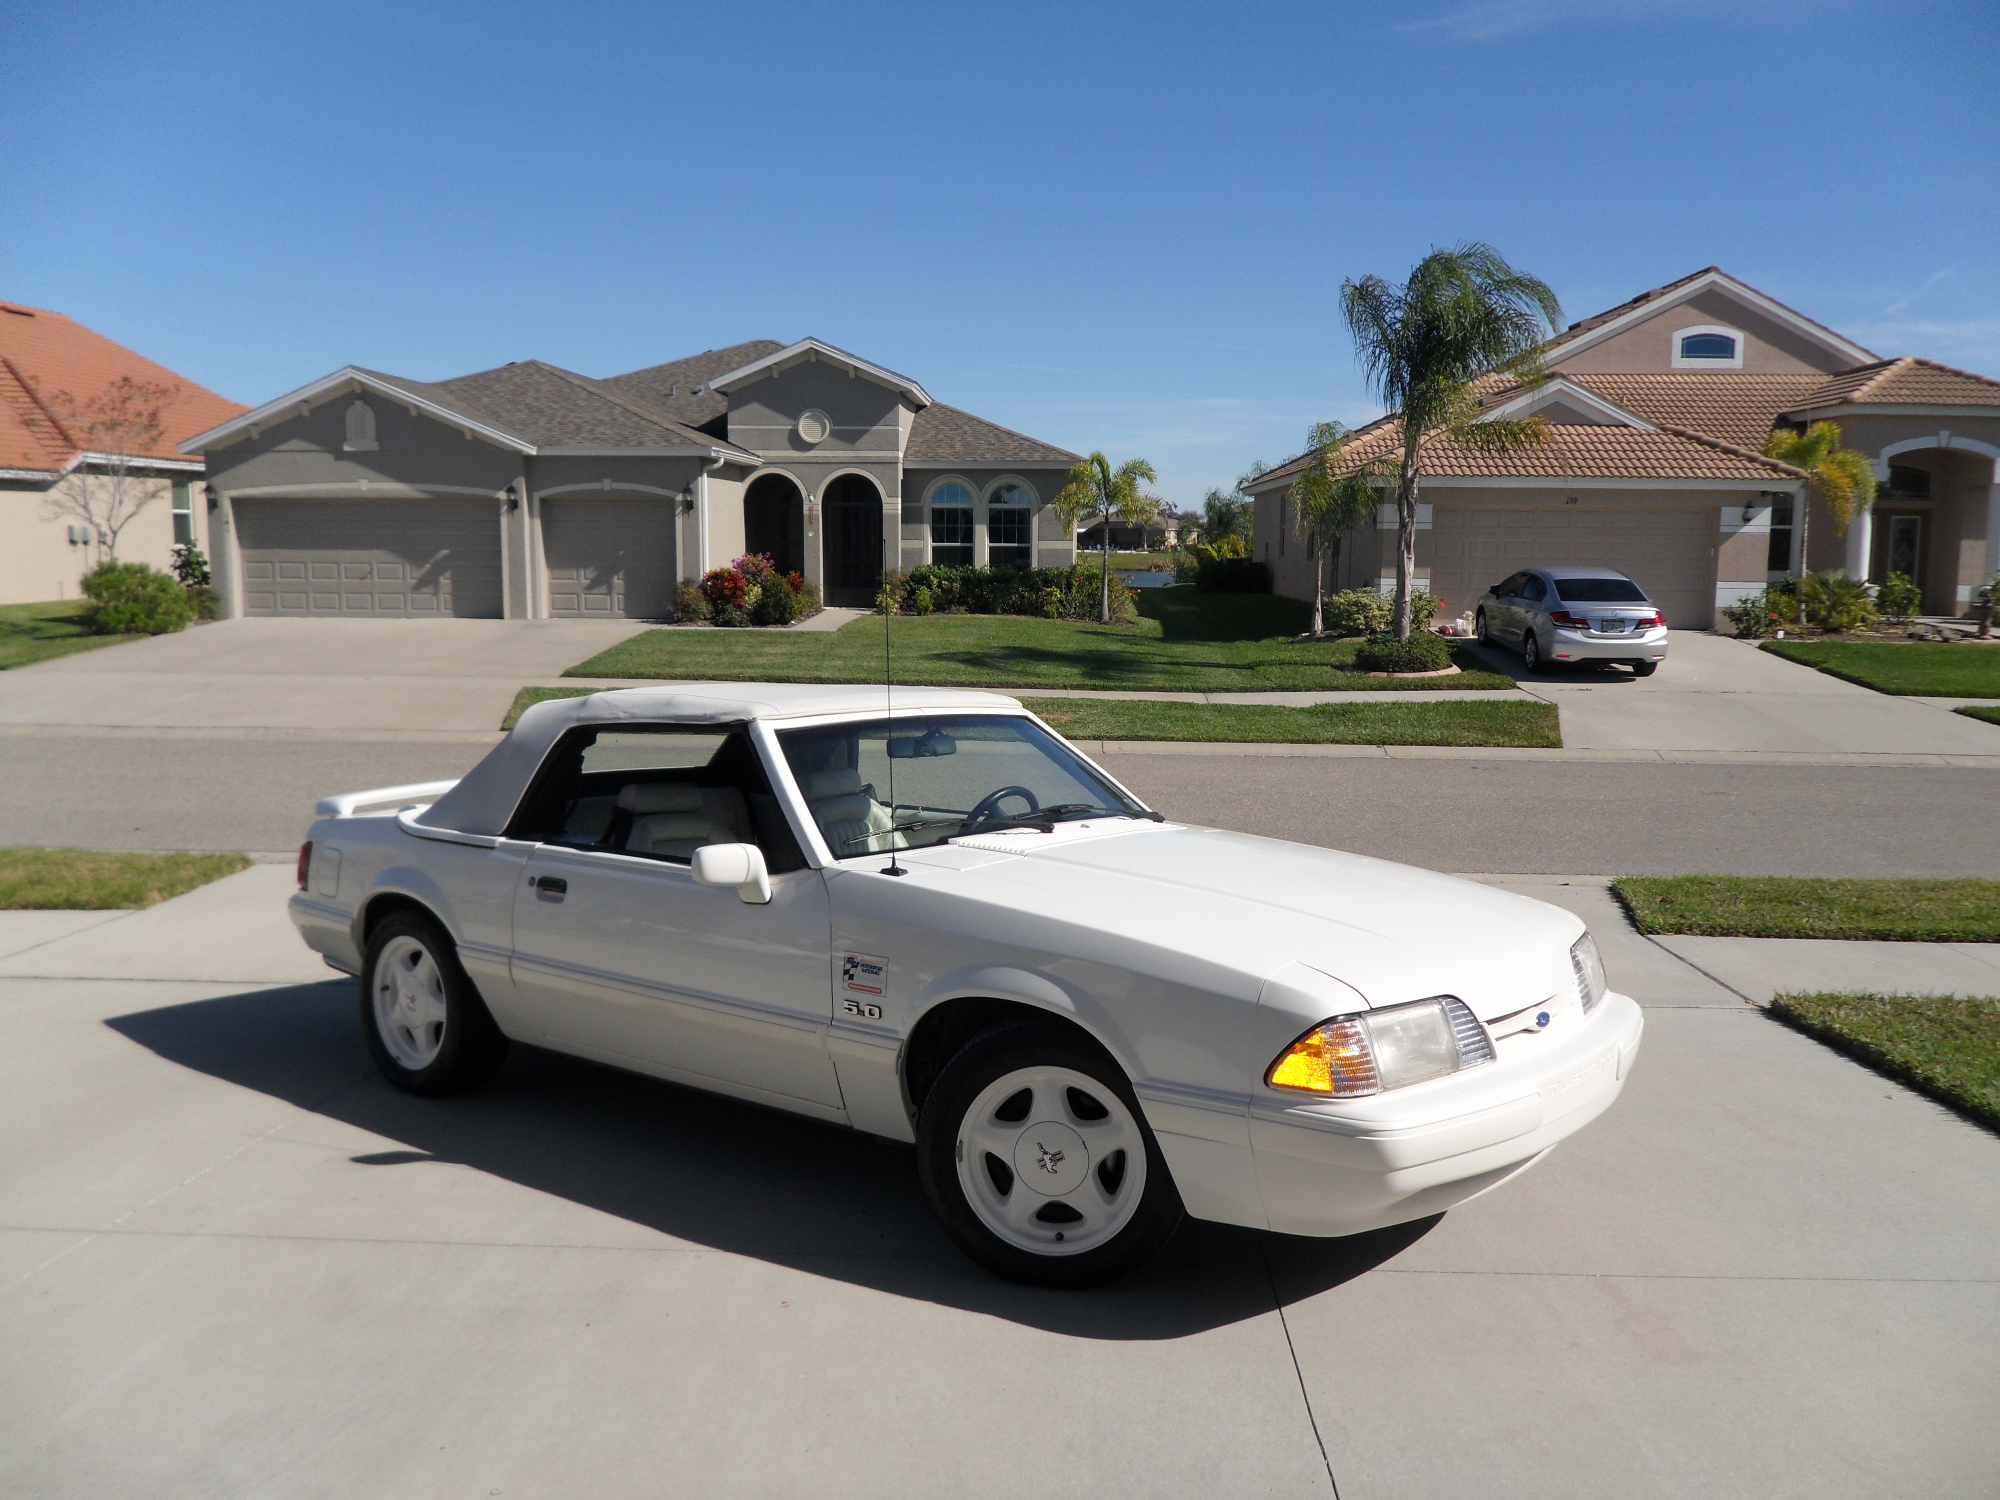 For sale: 1993 Ford Mustang Triple White Feature Car/Automatic/14k miles